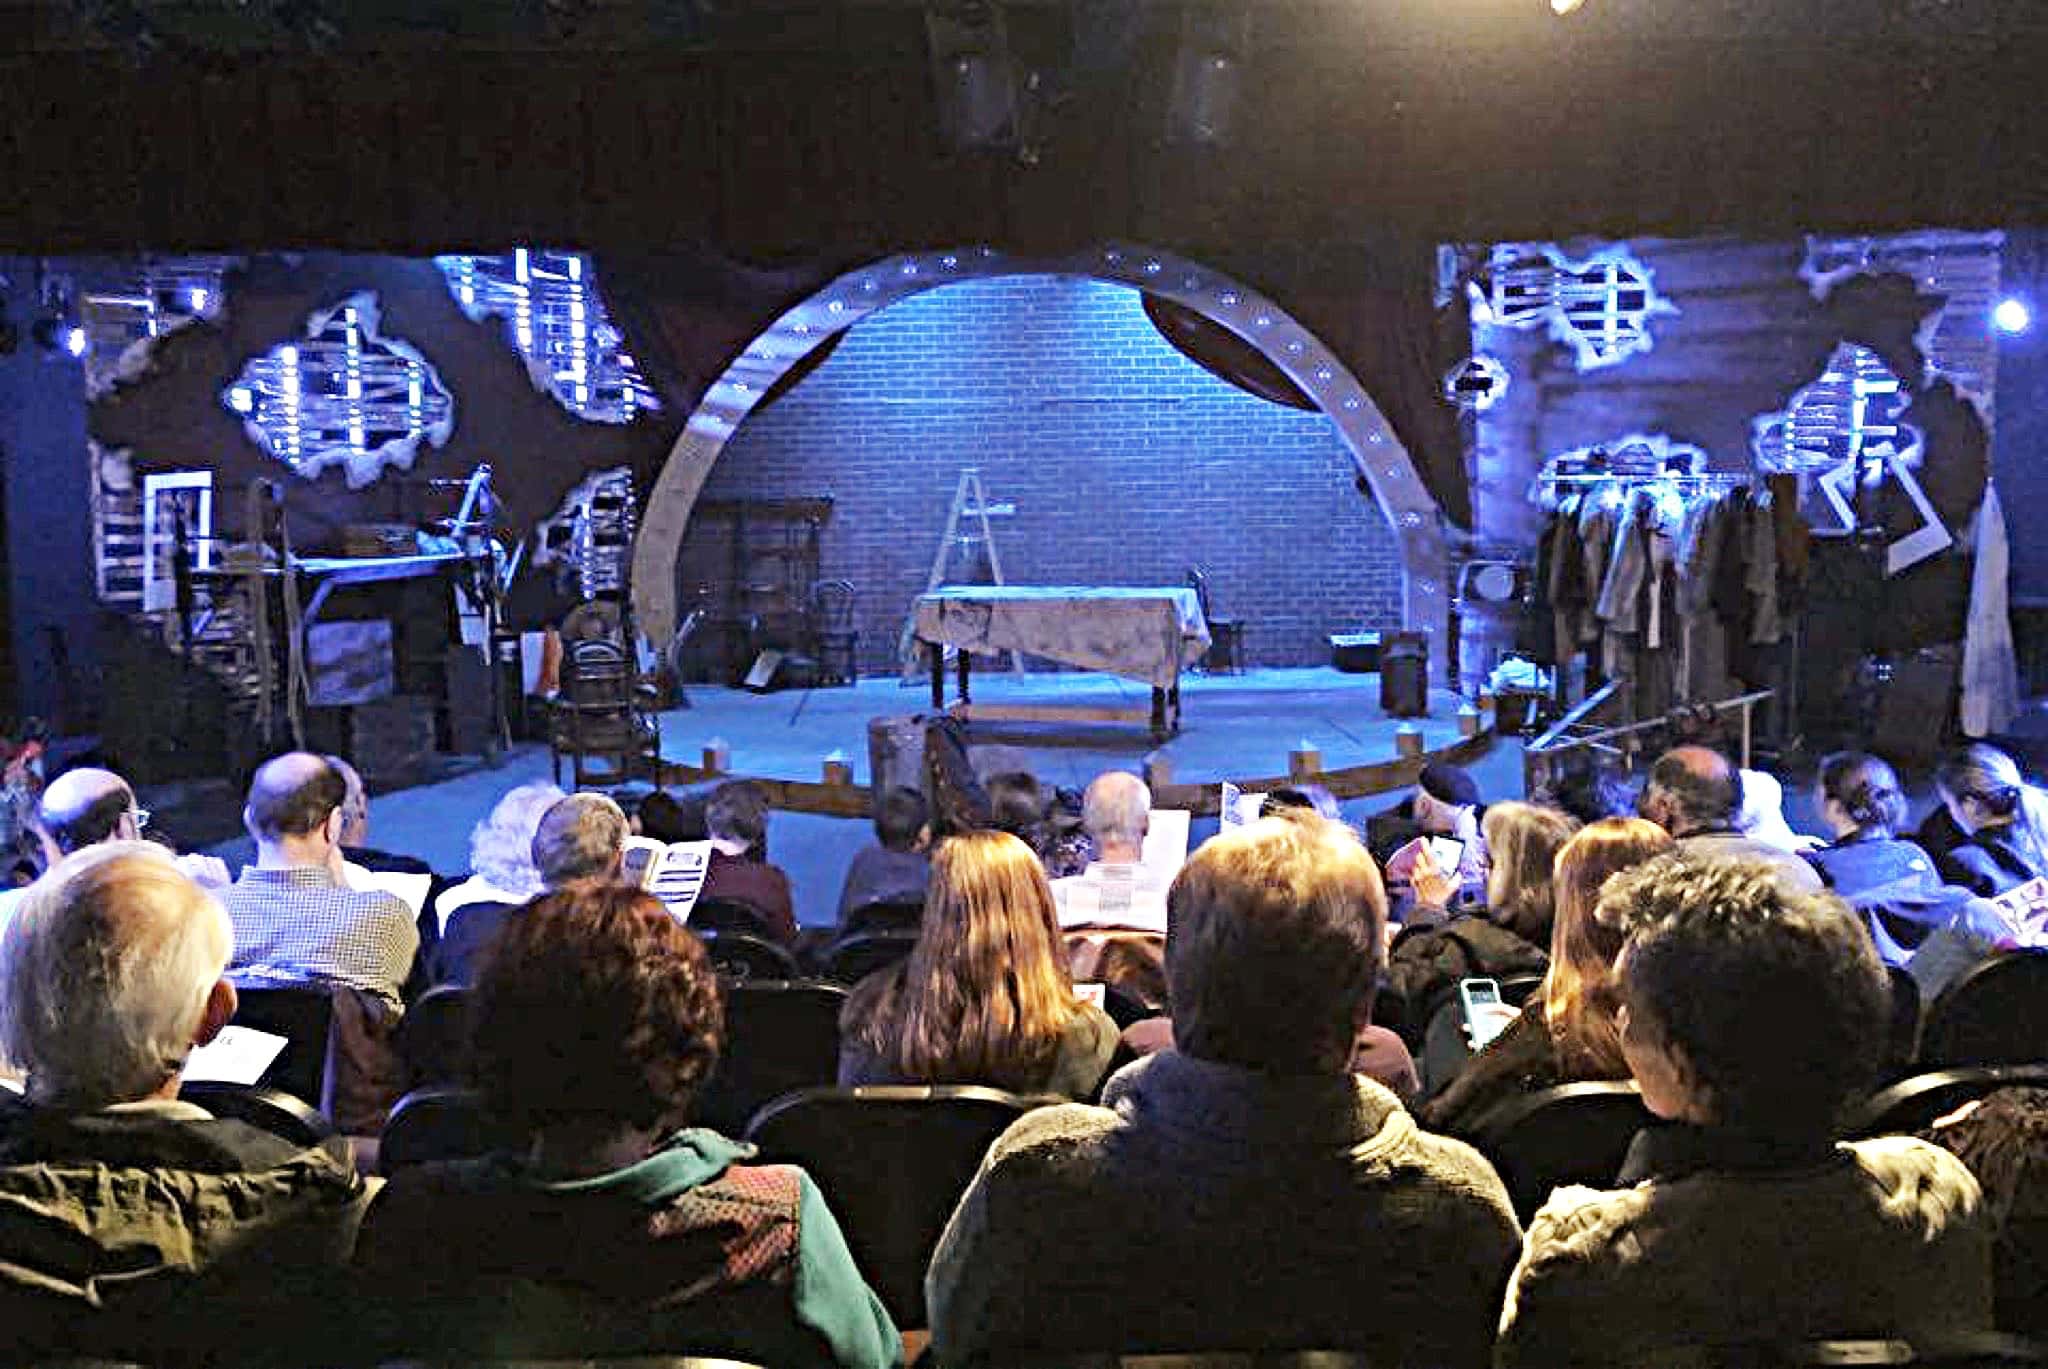 Greg Hersey's setup for Godspell at the Players by the Sea Theatre in Jacksonville Beach, Florida.